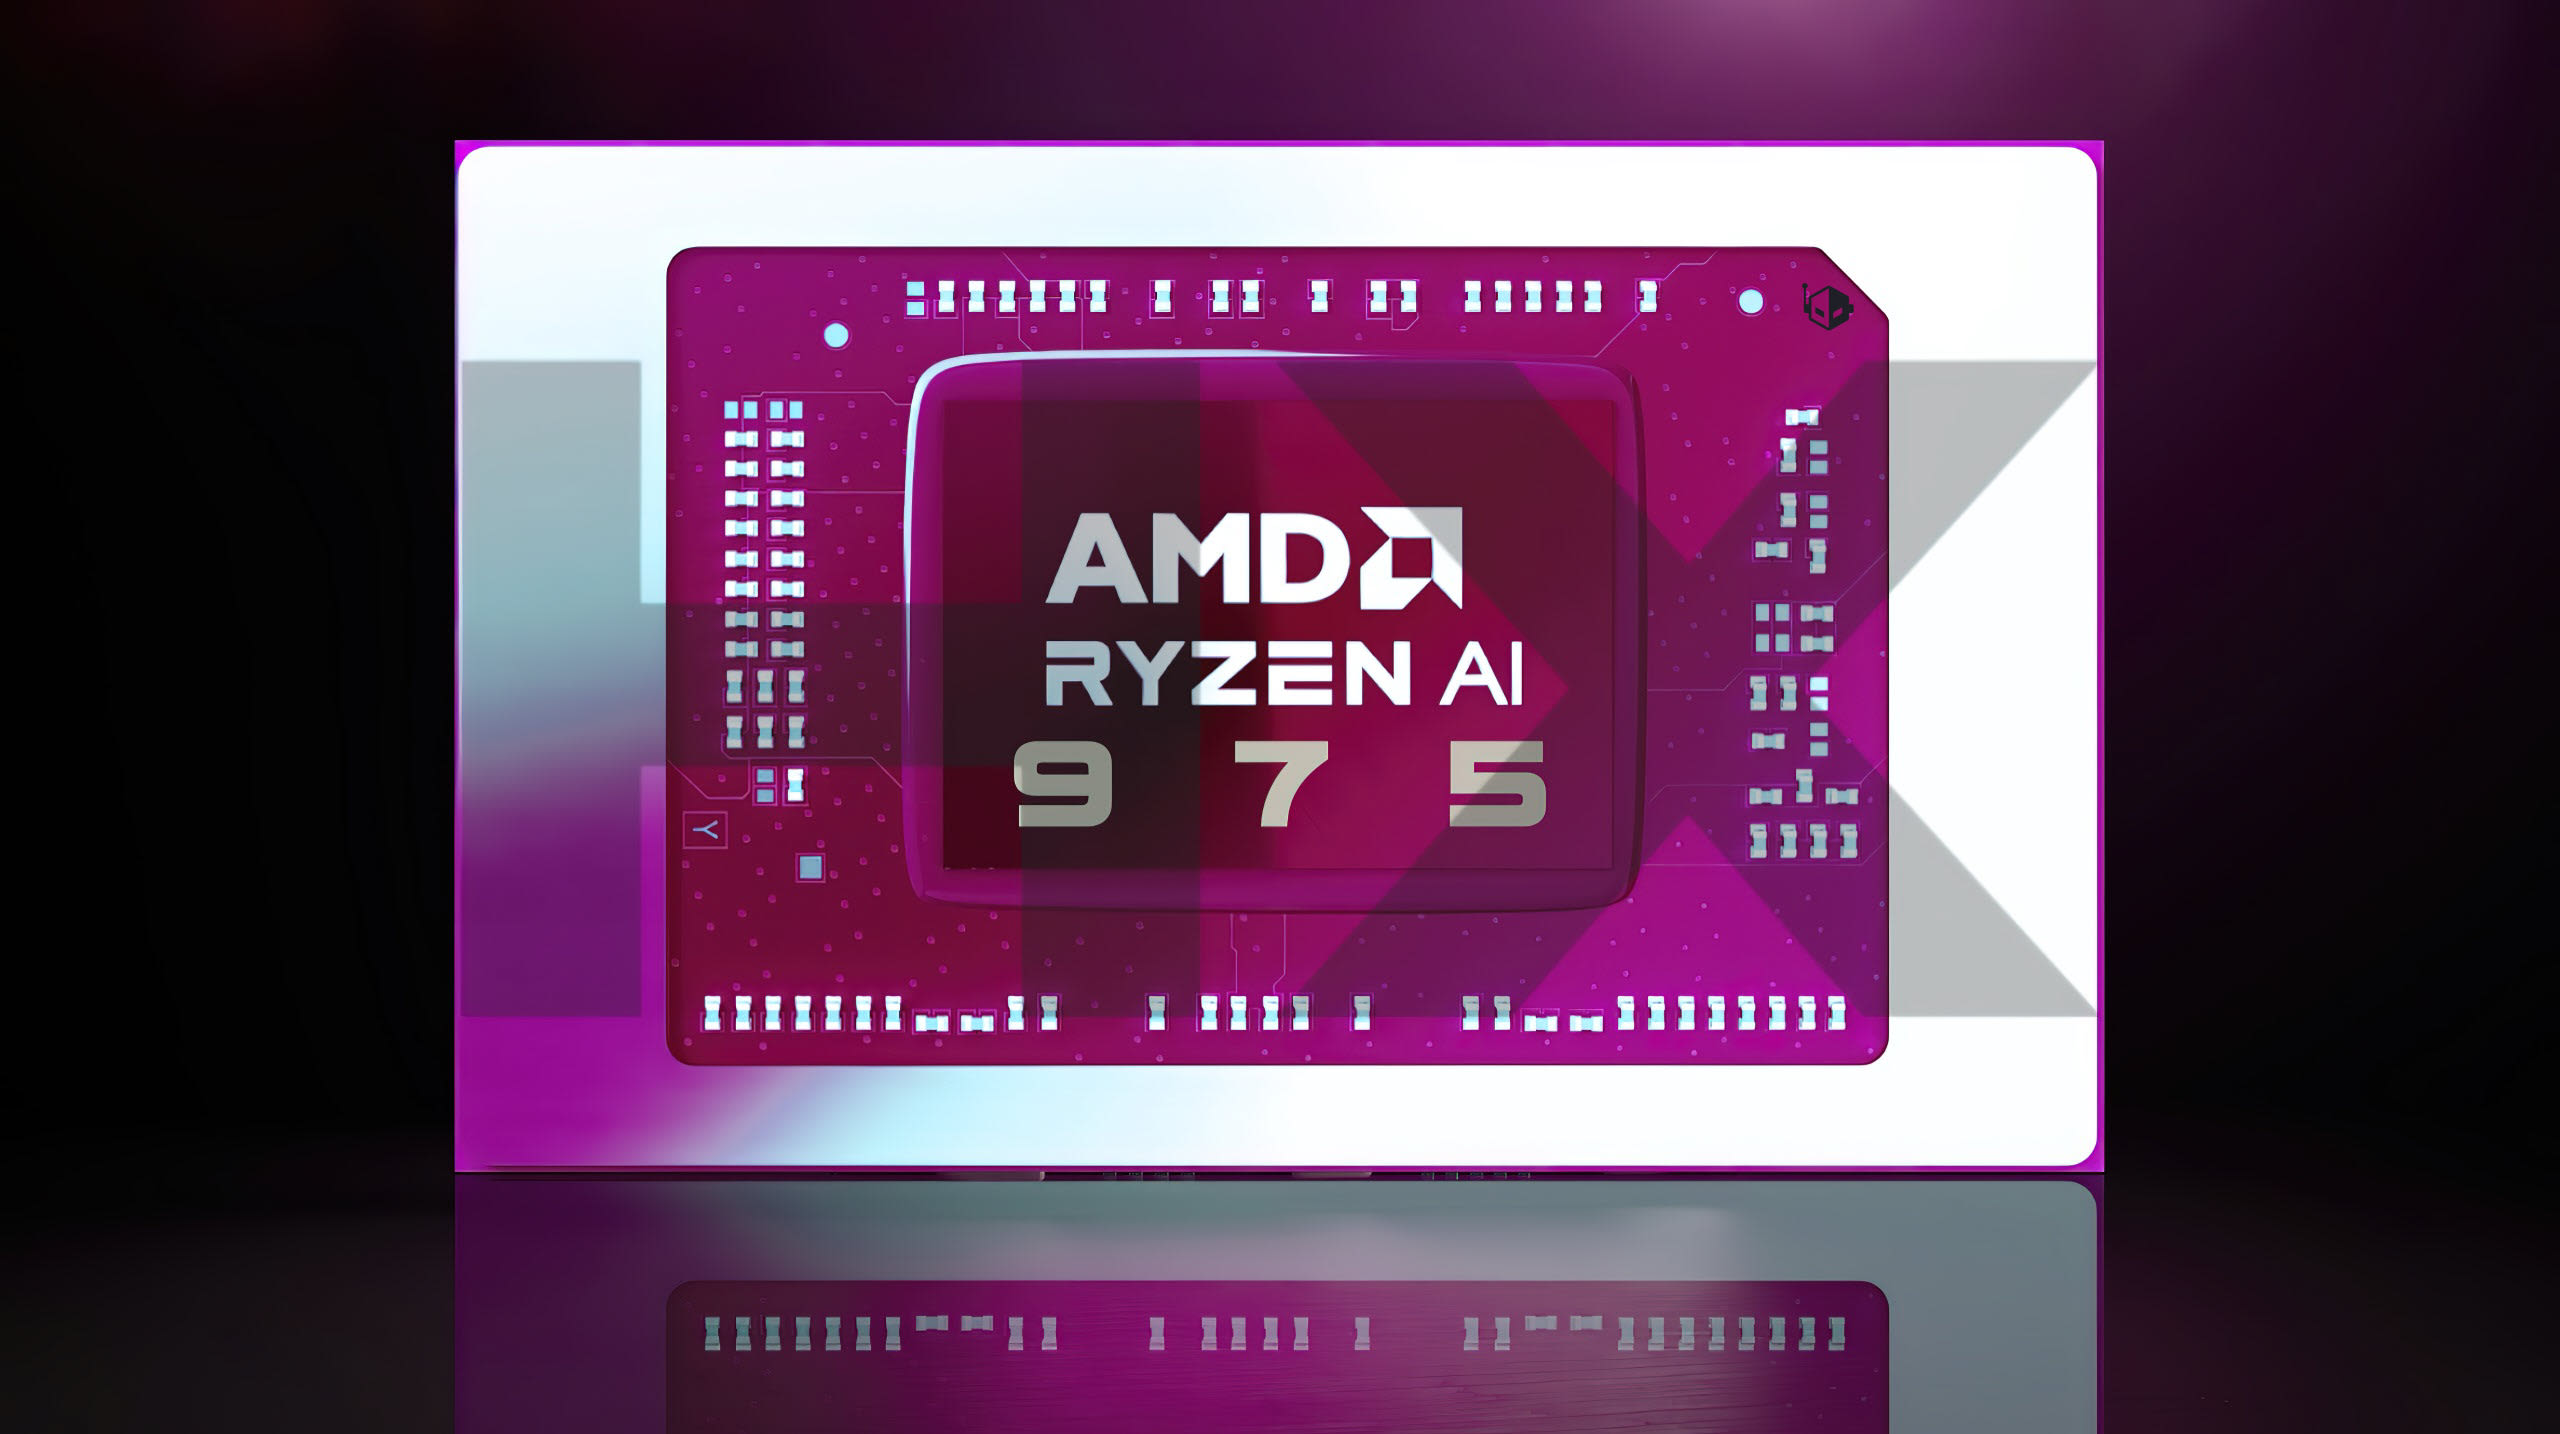 AMD Doesn't Want A Numerical Disadvantage Against Intel's Core Ultra, Shifts To "Ryzen AI 300" Branding For Strix APUs